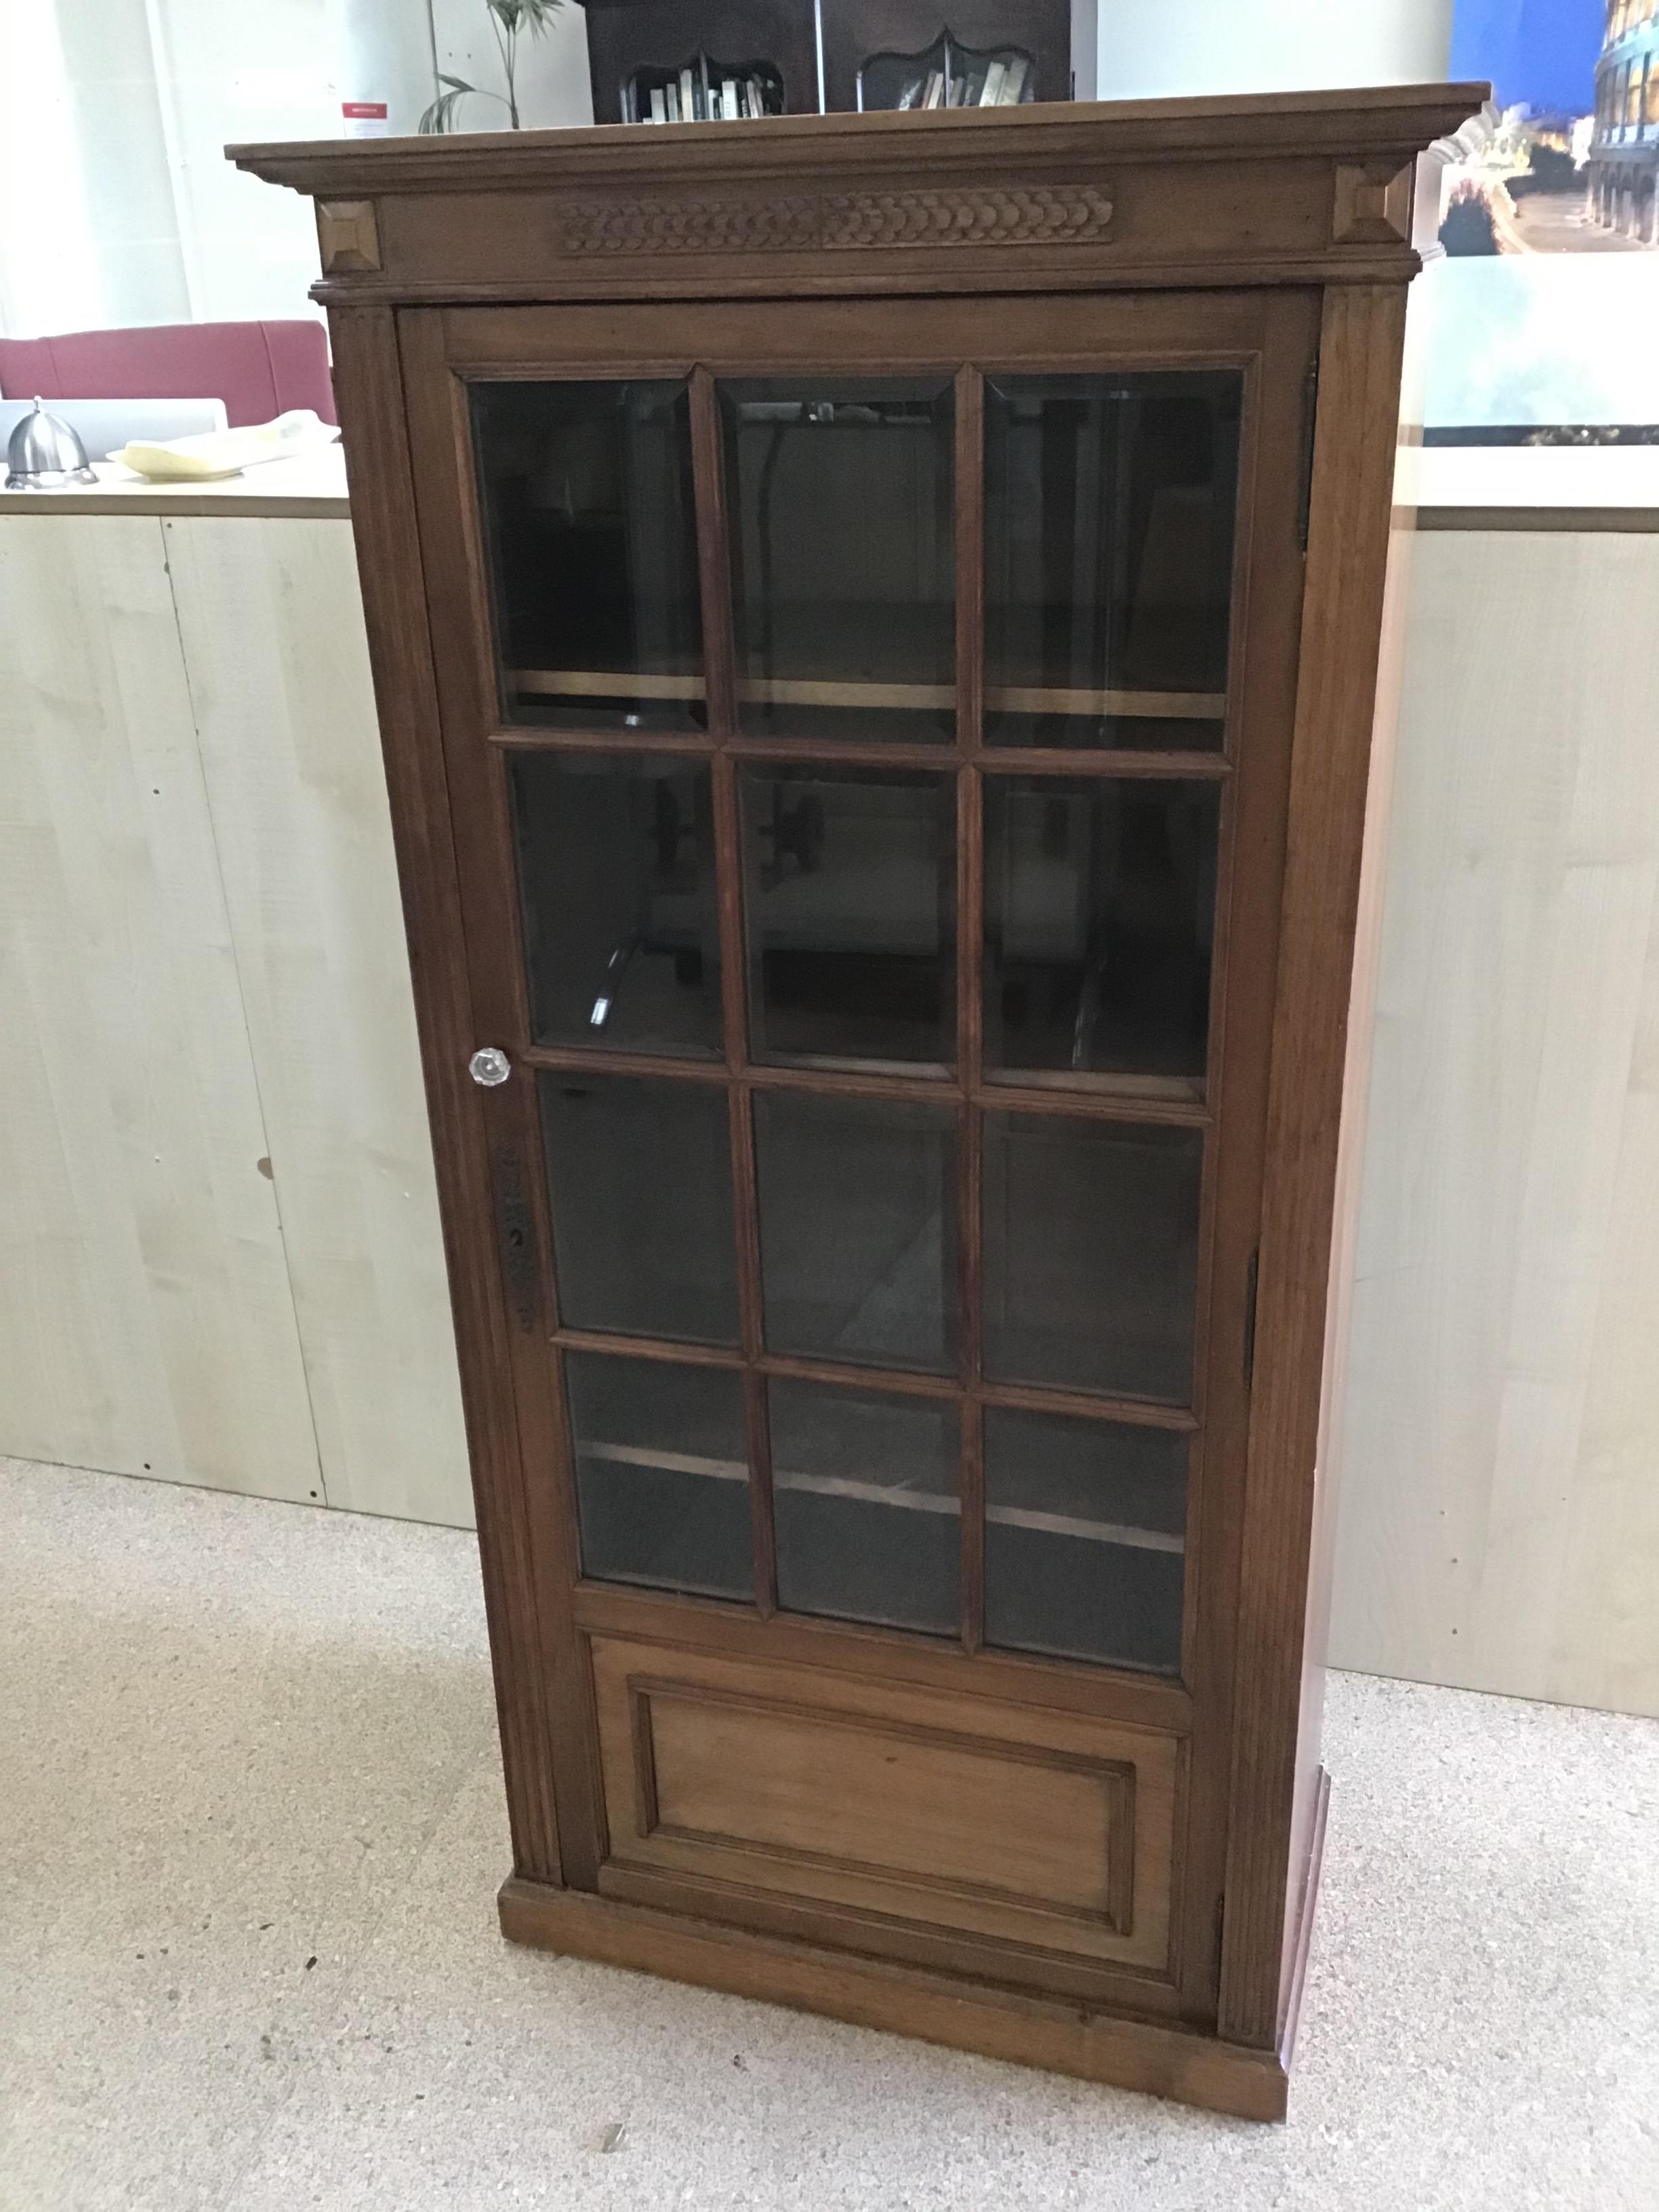 AN EDWARDIAN DISPLAY CABINET WITH BEVELLED GLASS AND LOCKABLE KEY - Image 4 of 9